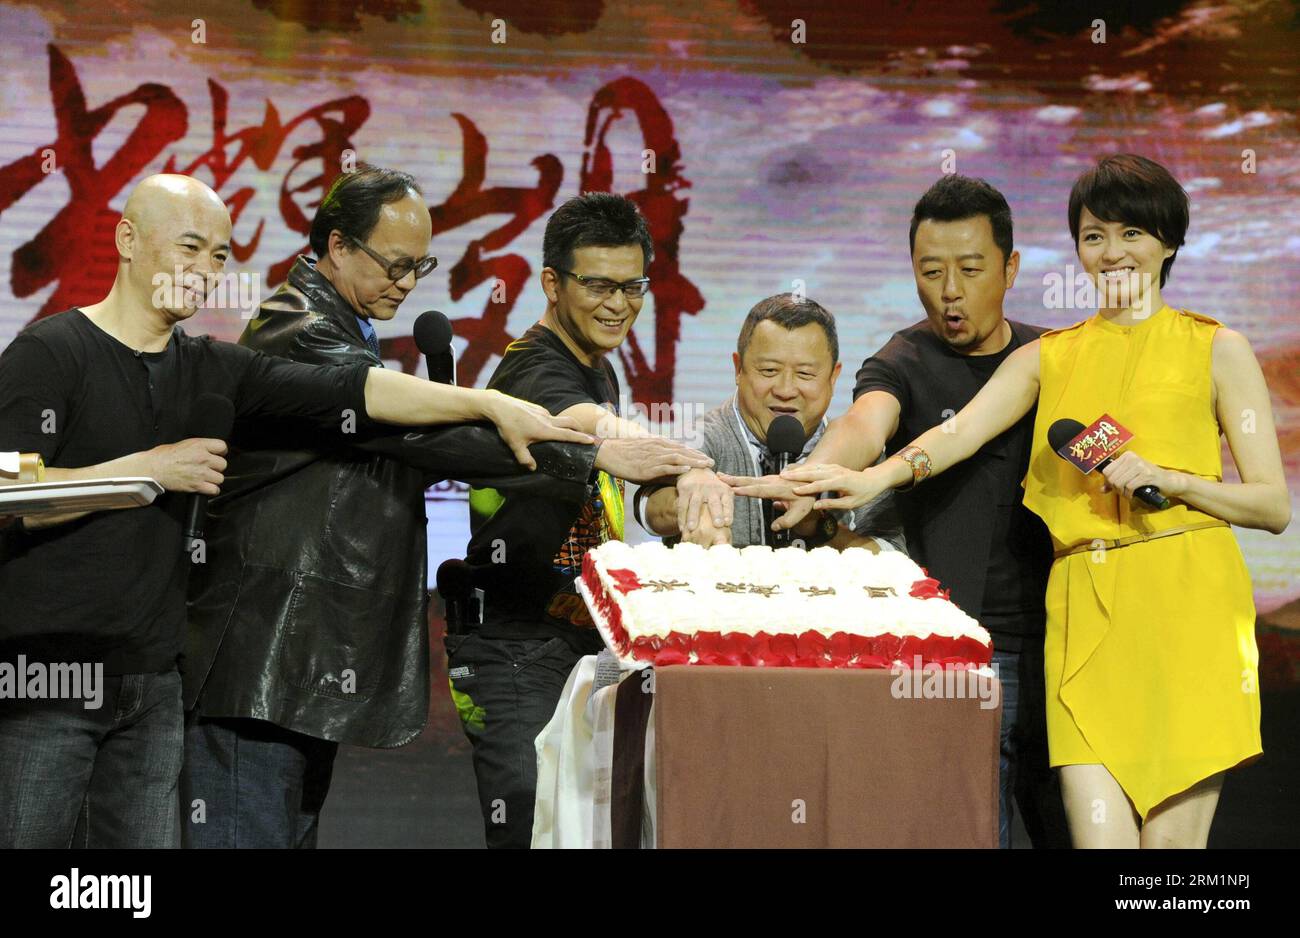 Bildnummer: 59610591  Datum: 06.05.2013  Copyright: imago/Xinhua Actors celebrate for Eric Tsang s 60th birthday at the news conference held for the action movie Seven Assassins in Beijing, May 6, 2013.  (Xinhua) (zwx/ry) CHINA-BEIJING-MOVIE-SEVEN ASSASSINS-NEWS CONFERENCE (CN) PUBLICATIONxNOTxINxCHN Entertainment People x1x xkg 2013 quer     59610591 Date 06 05 2013 Copyright Imago XINHUA Actors Celebrate for Eric Tsang S 60th Birthday AT The News Conference Hero for The Action Movie Seven Assassins in Beijing May 6 2013 XINHUA  Ry China Beijing Movie Seven Assassins News Conference CN PUBLIC Stock Photo